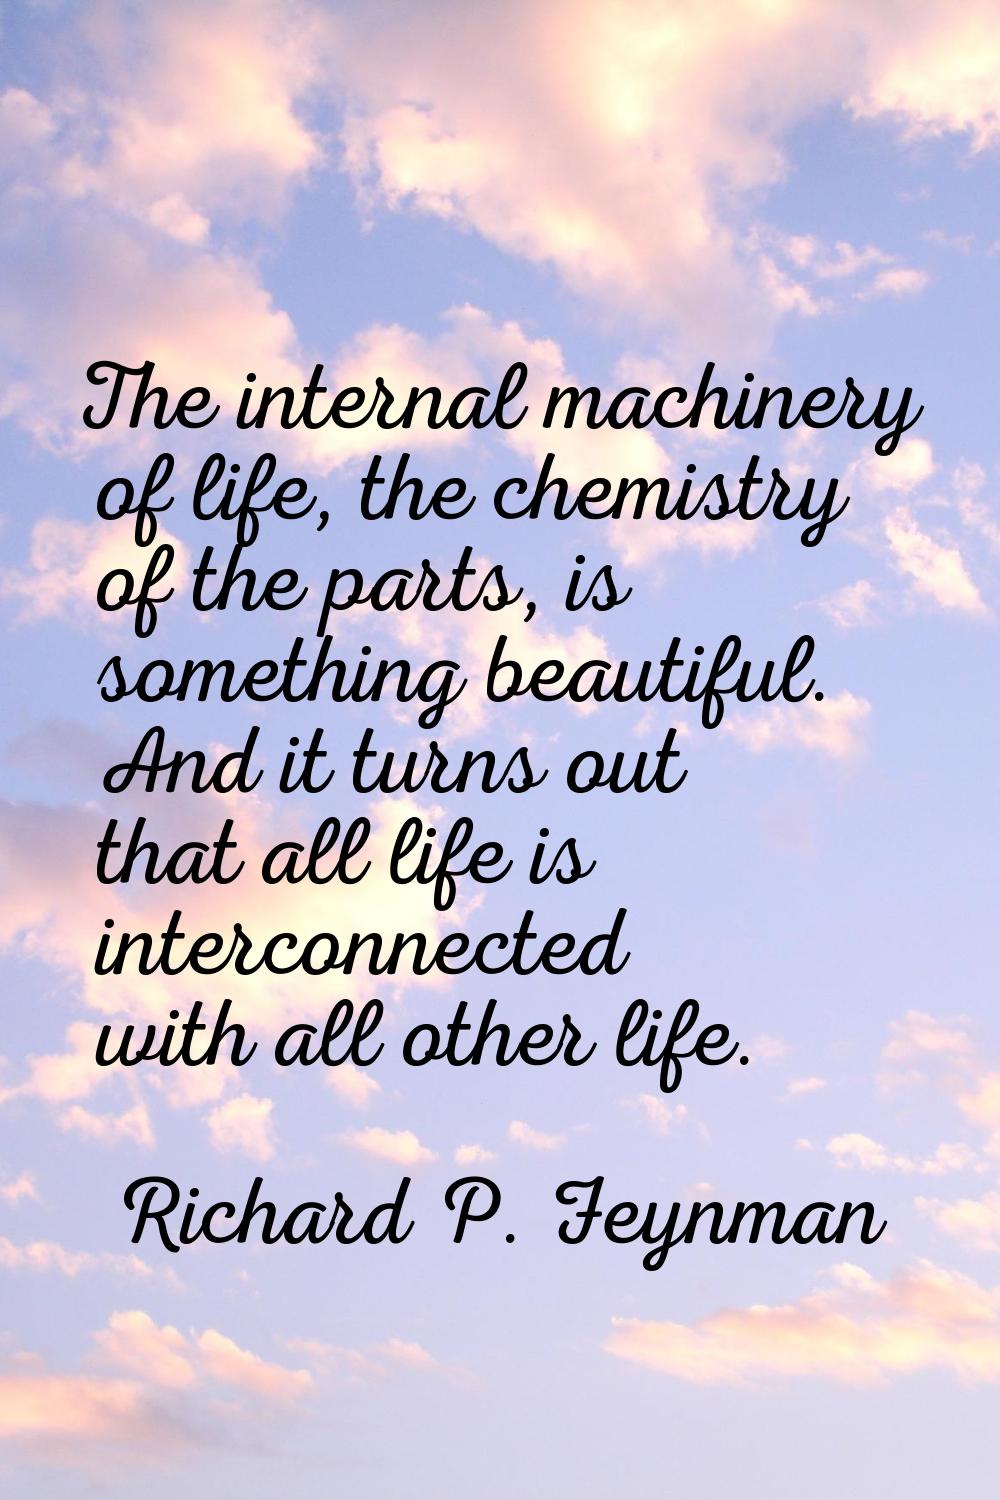 The internal machinery of life, the chemistry of the parts, is something beautiful. And it turns ou